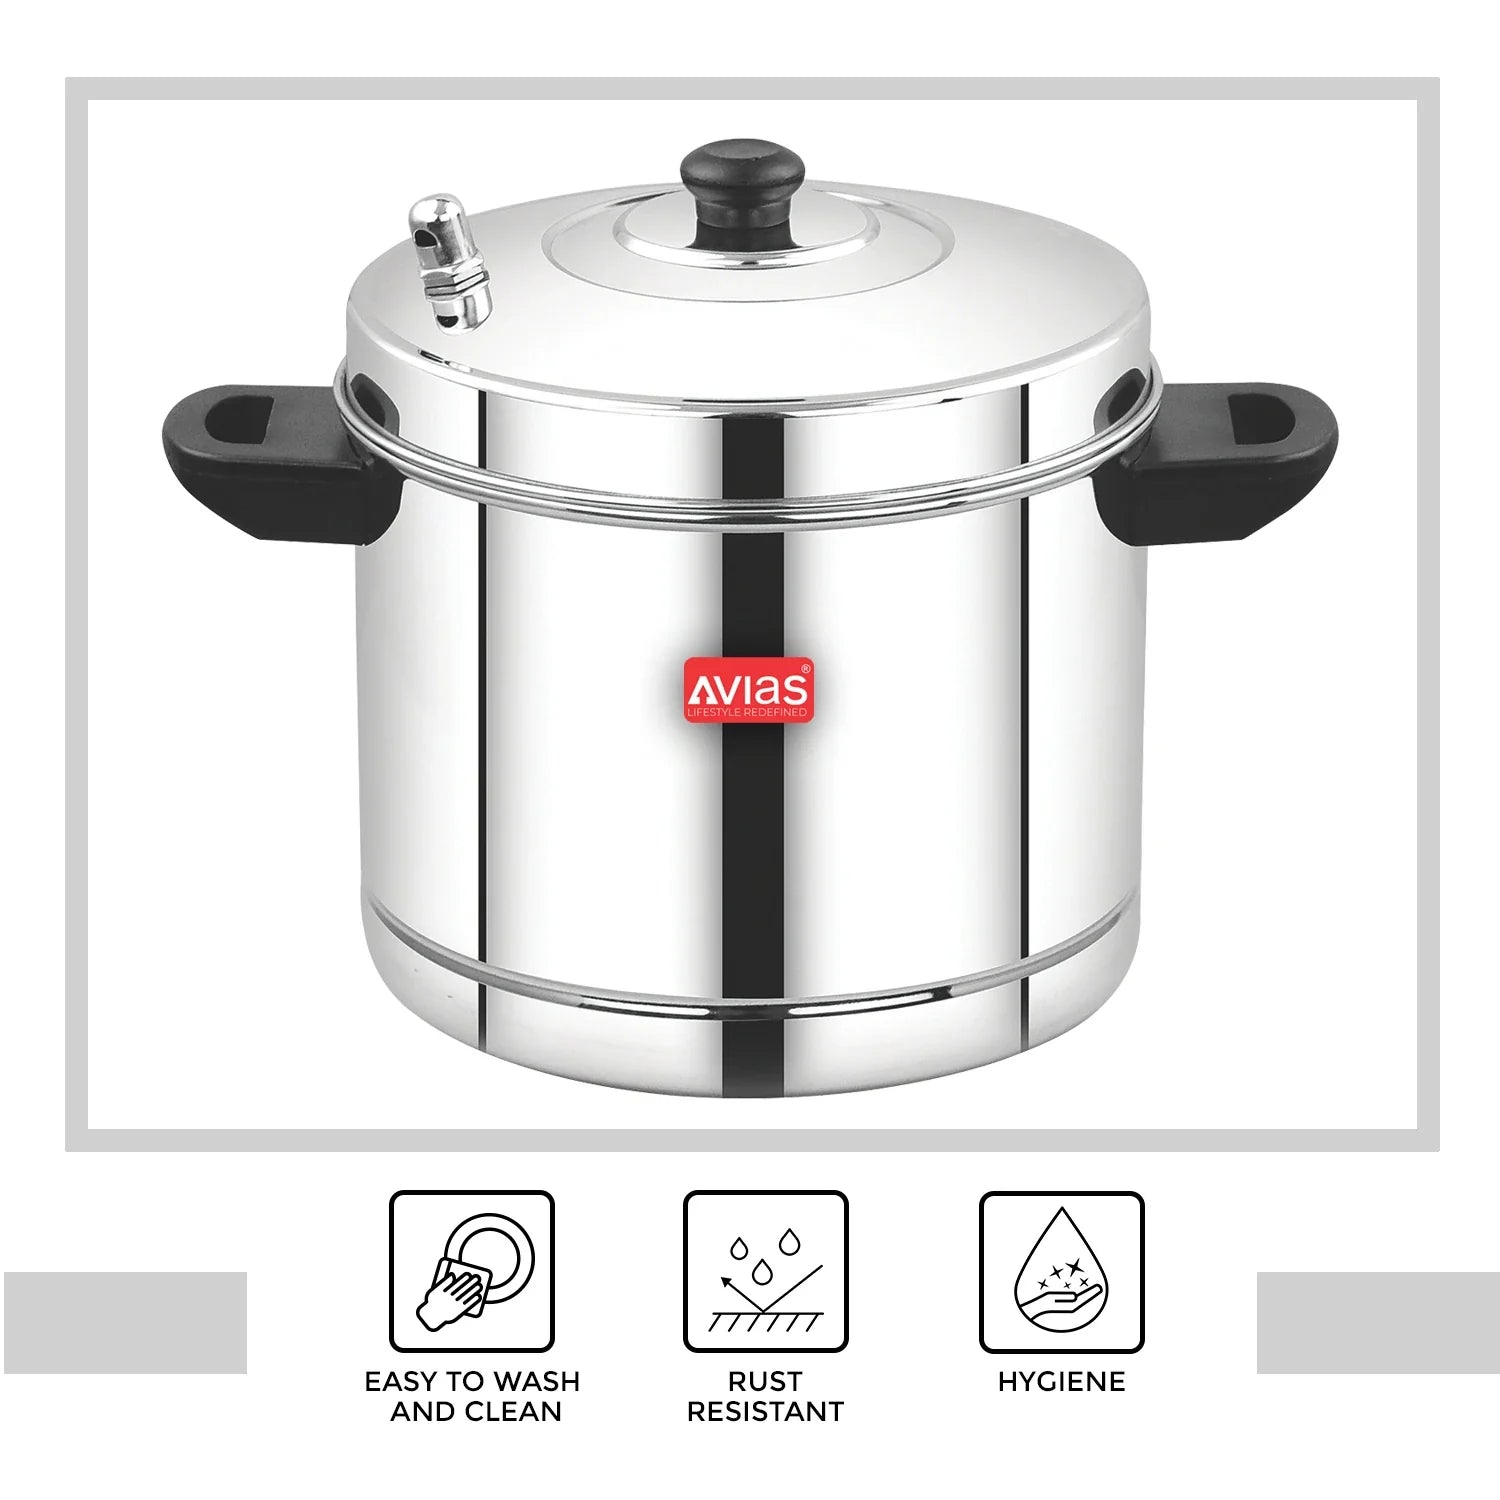 AVIAS stainless steel Idly cooker/ Idly maker/ Idly pot with Bakelite handles usability